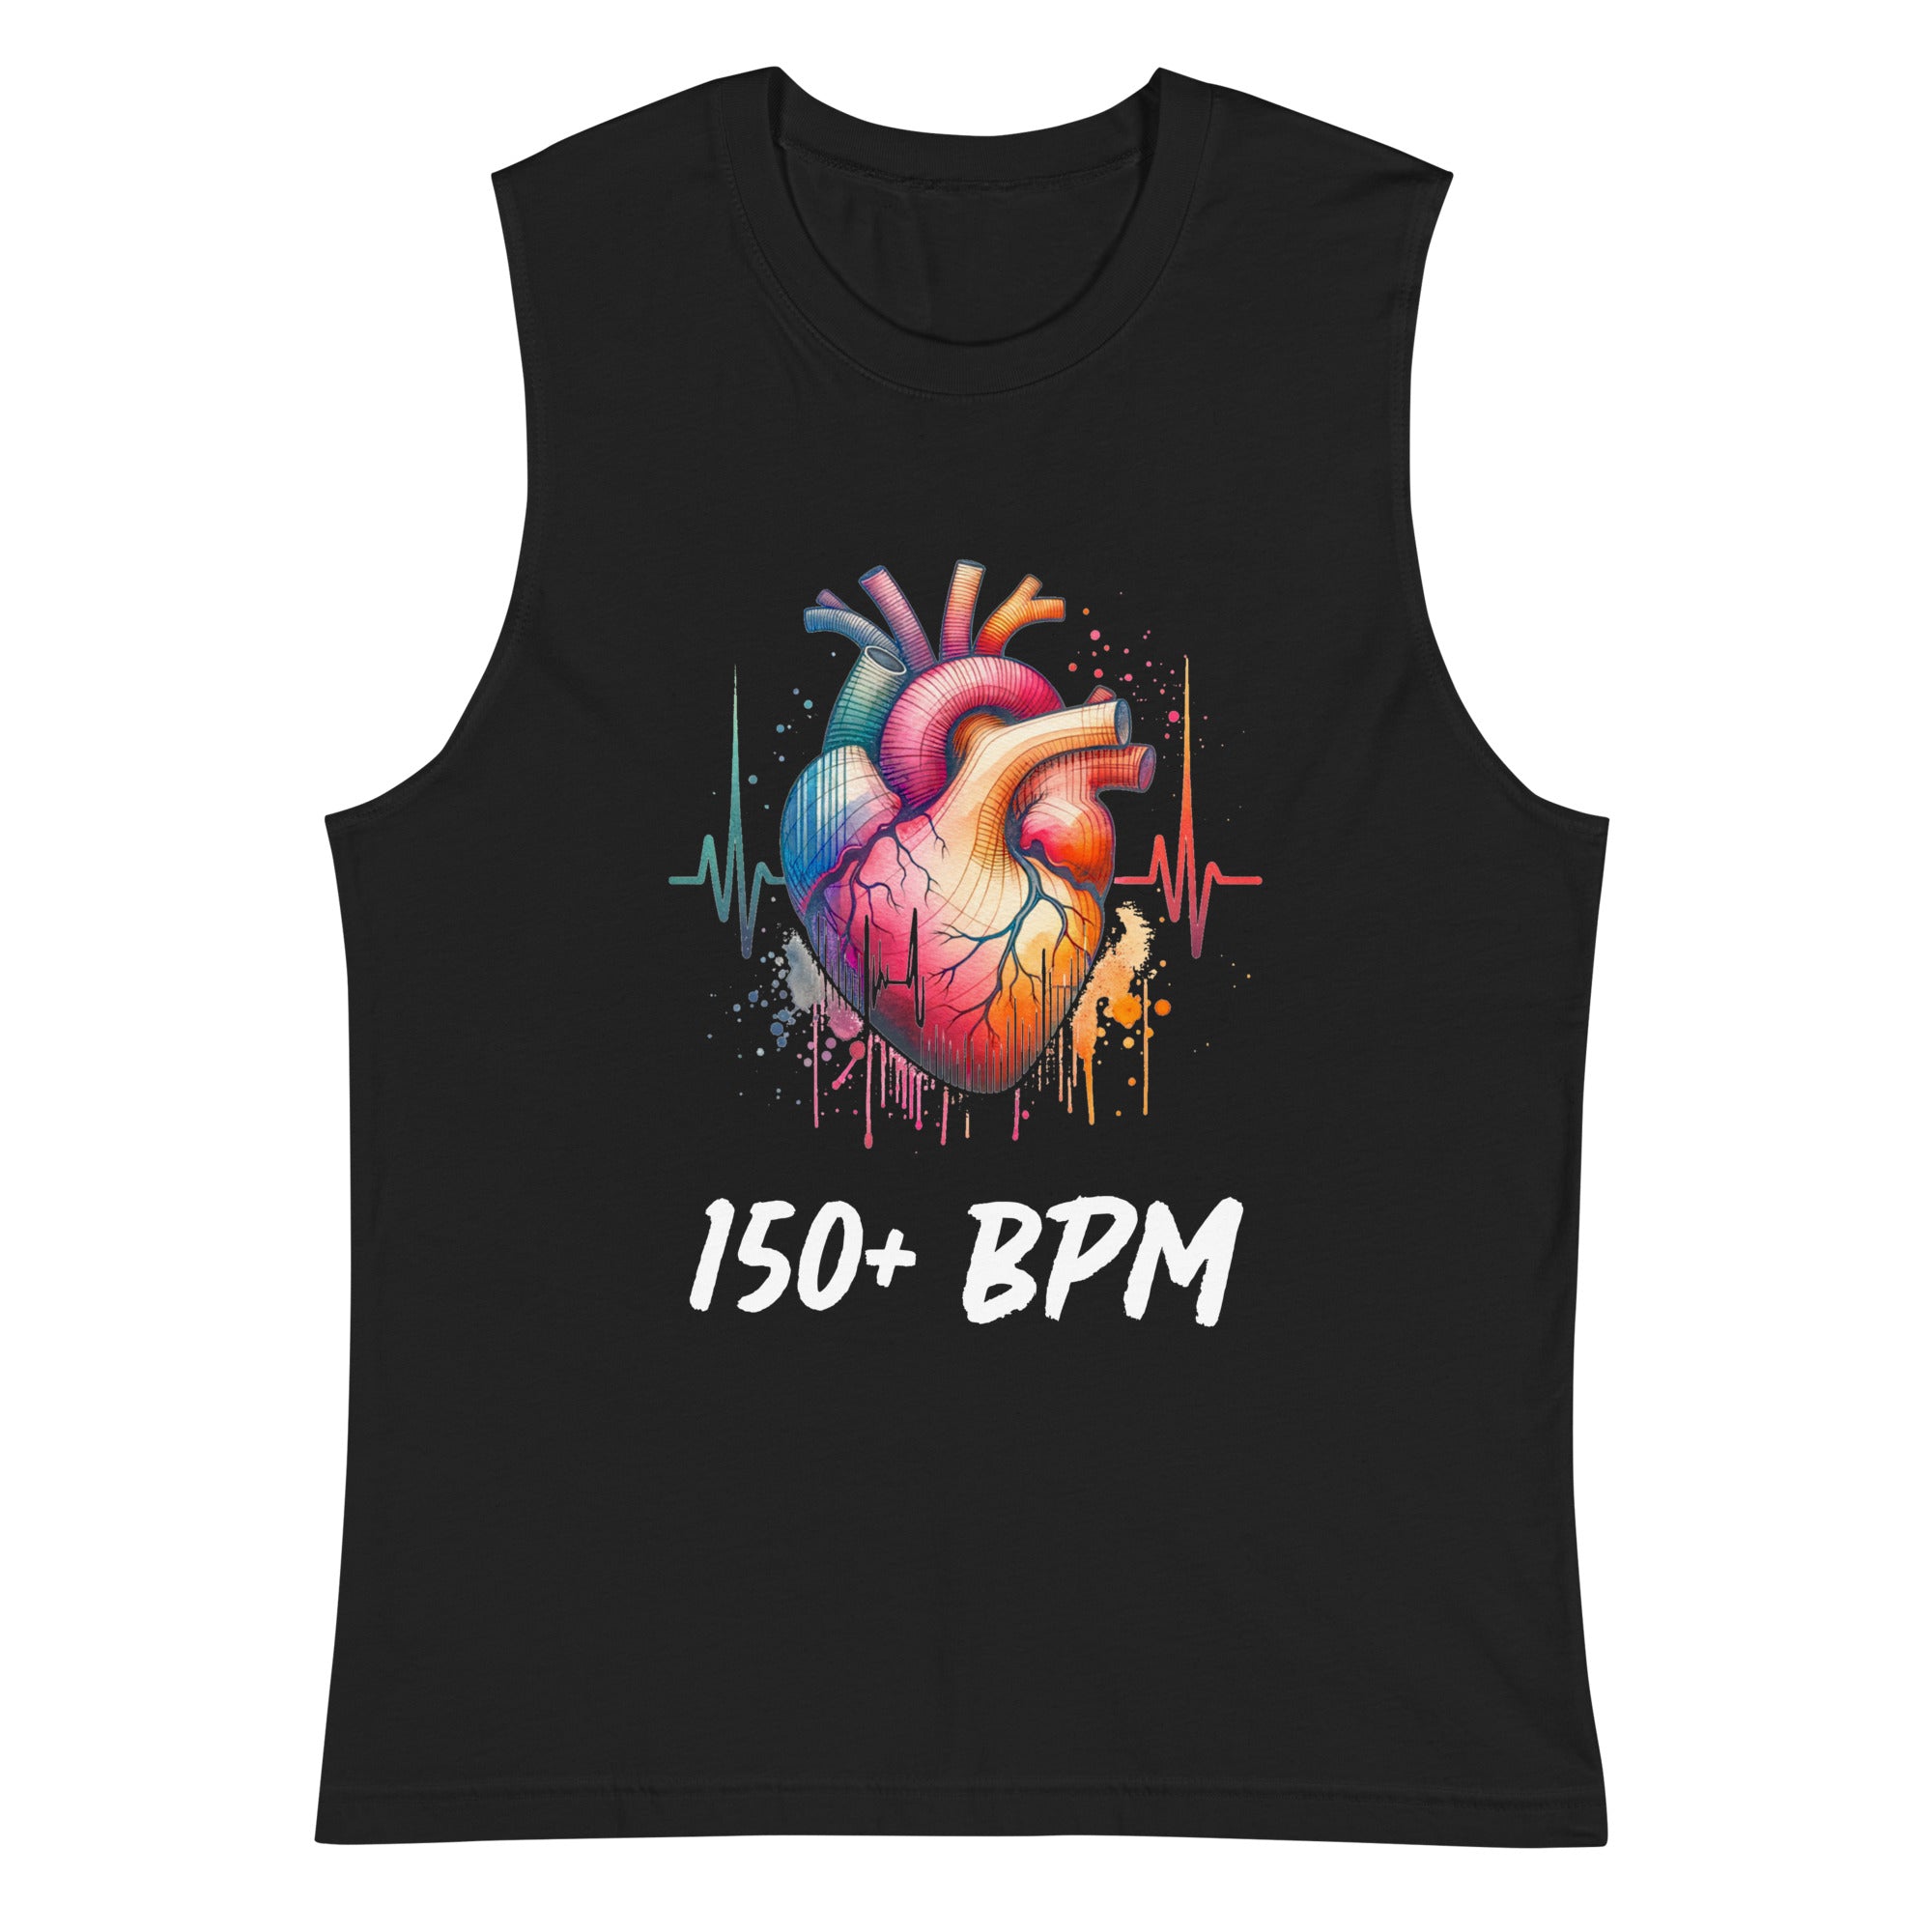 Get ready to rock out to the harder beats with our 150 BPM MUSCLE TANK. Made for hardstyle enthusiasts, this tank will have you standing out at any event or festival. So show off your love for hardstyle in style!